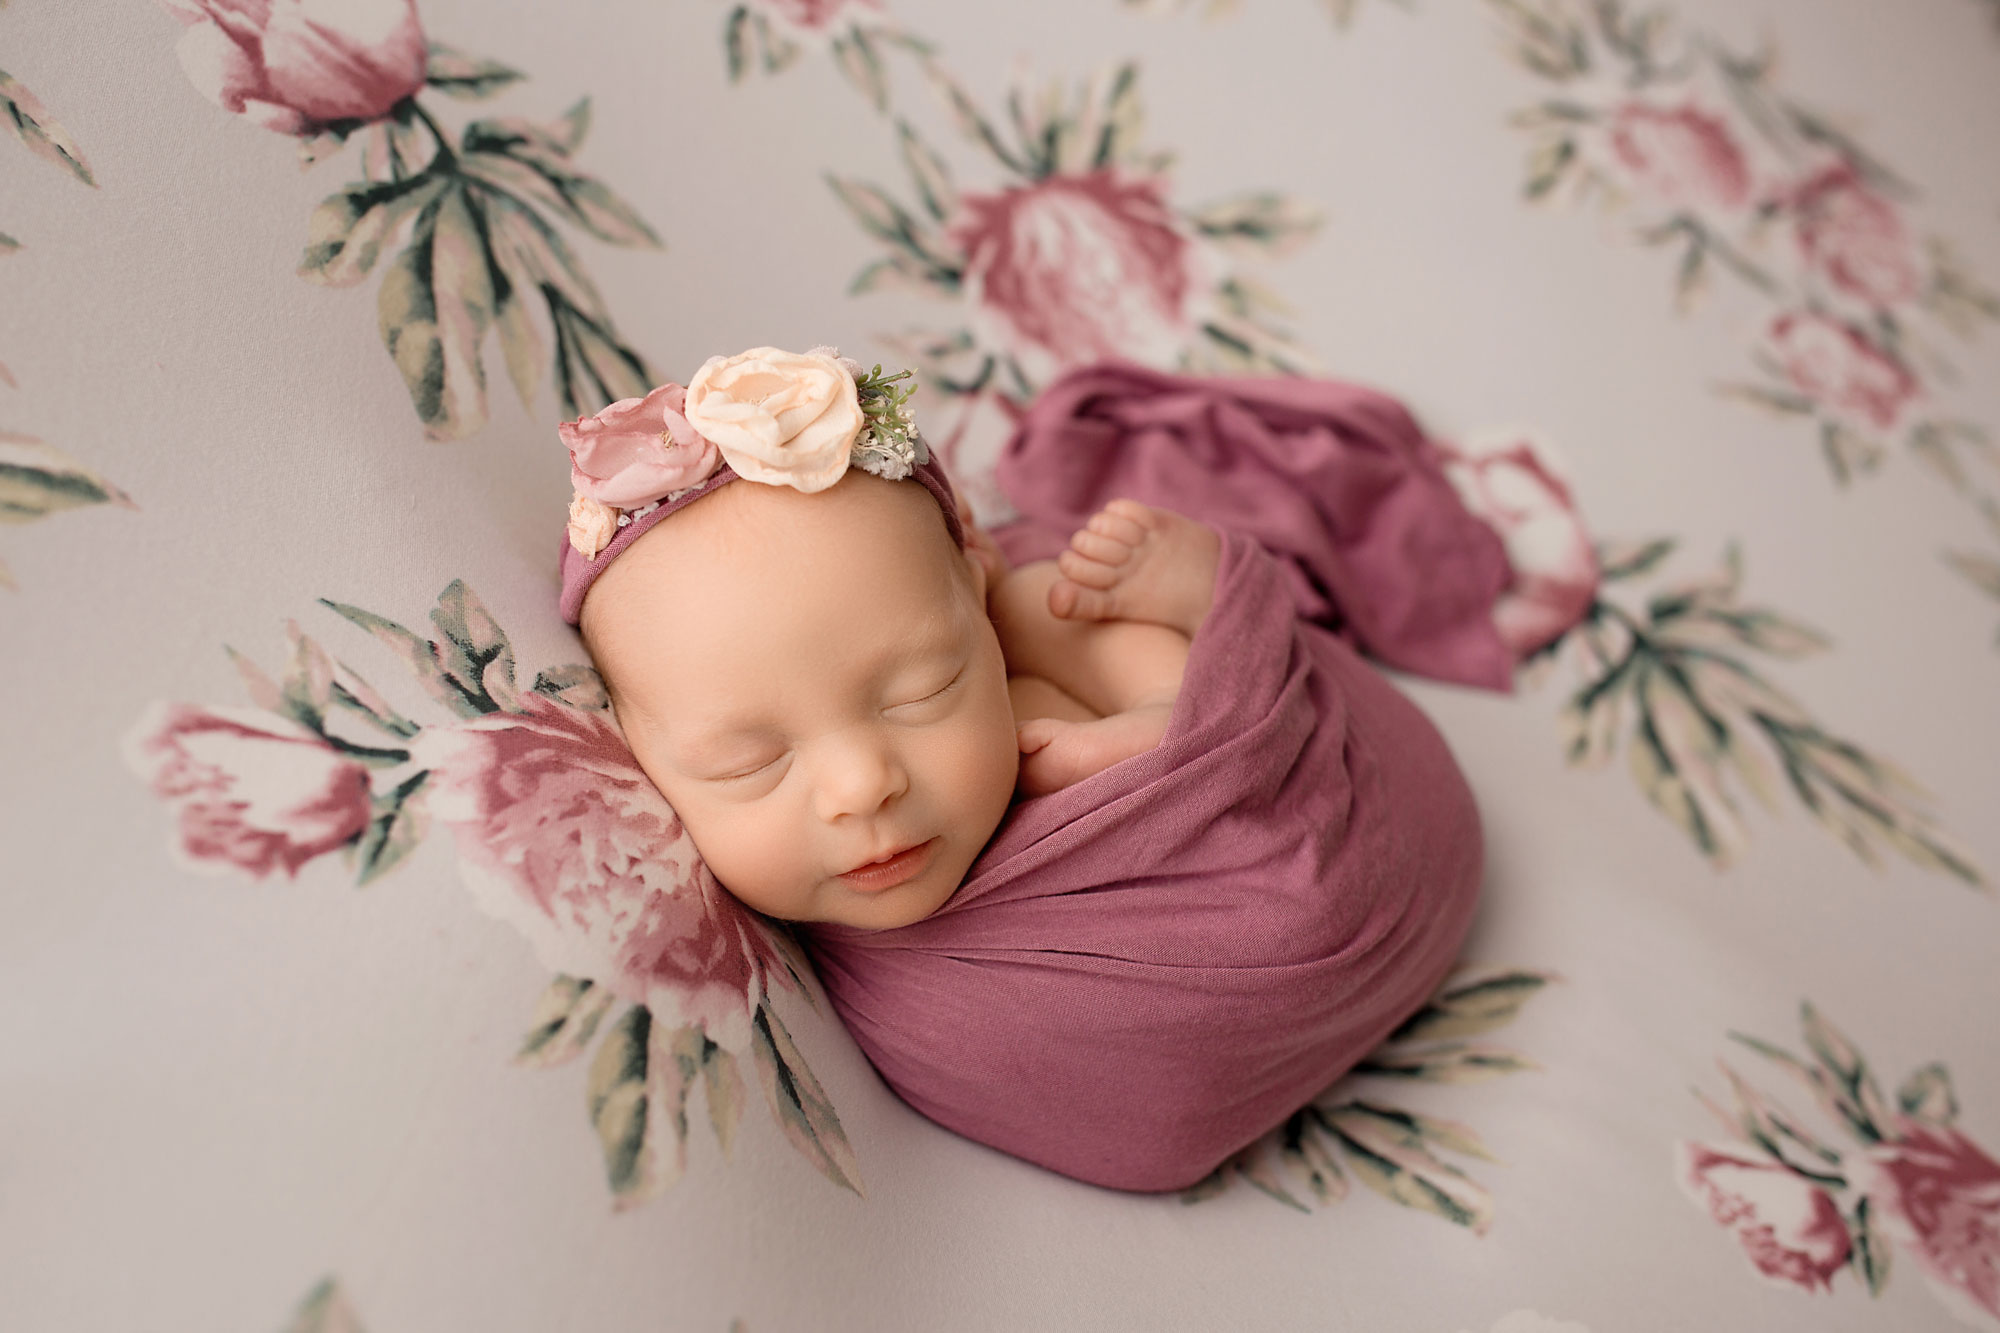 baby girl sleeping n a floral backdrop wrapped posing newborn photo session nj